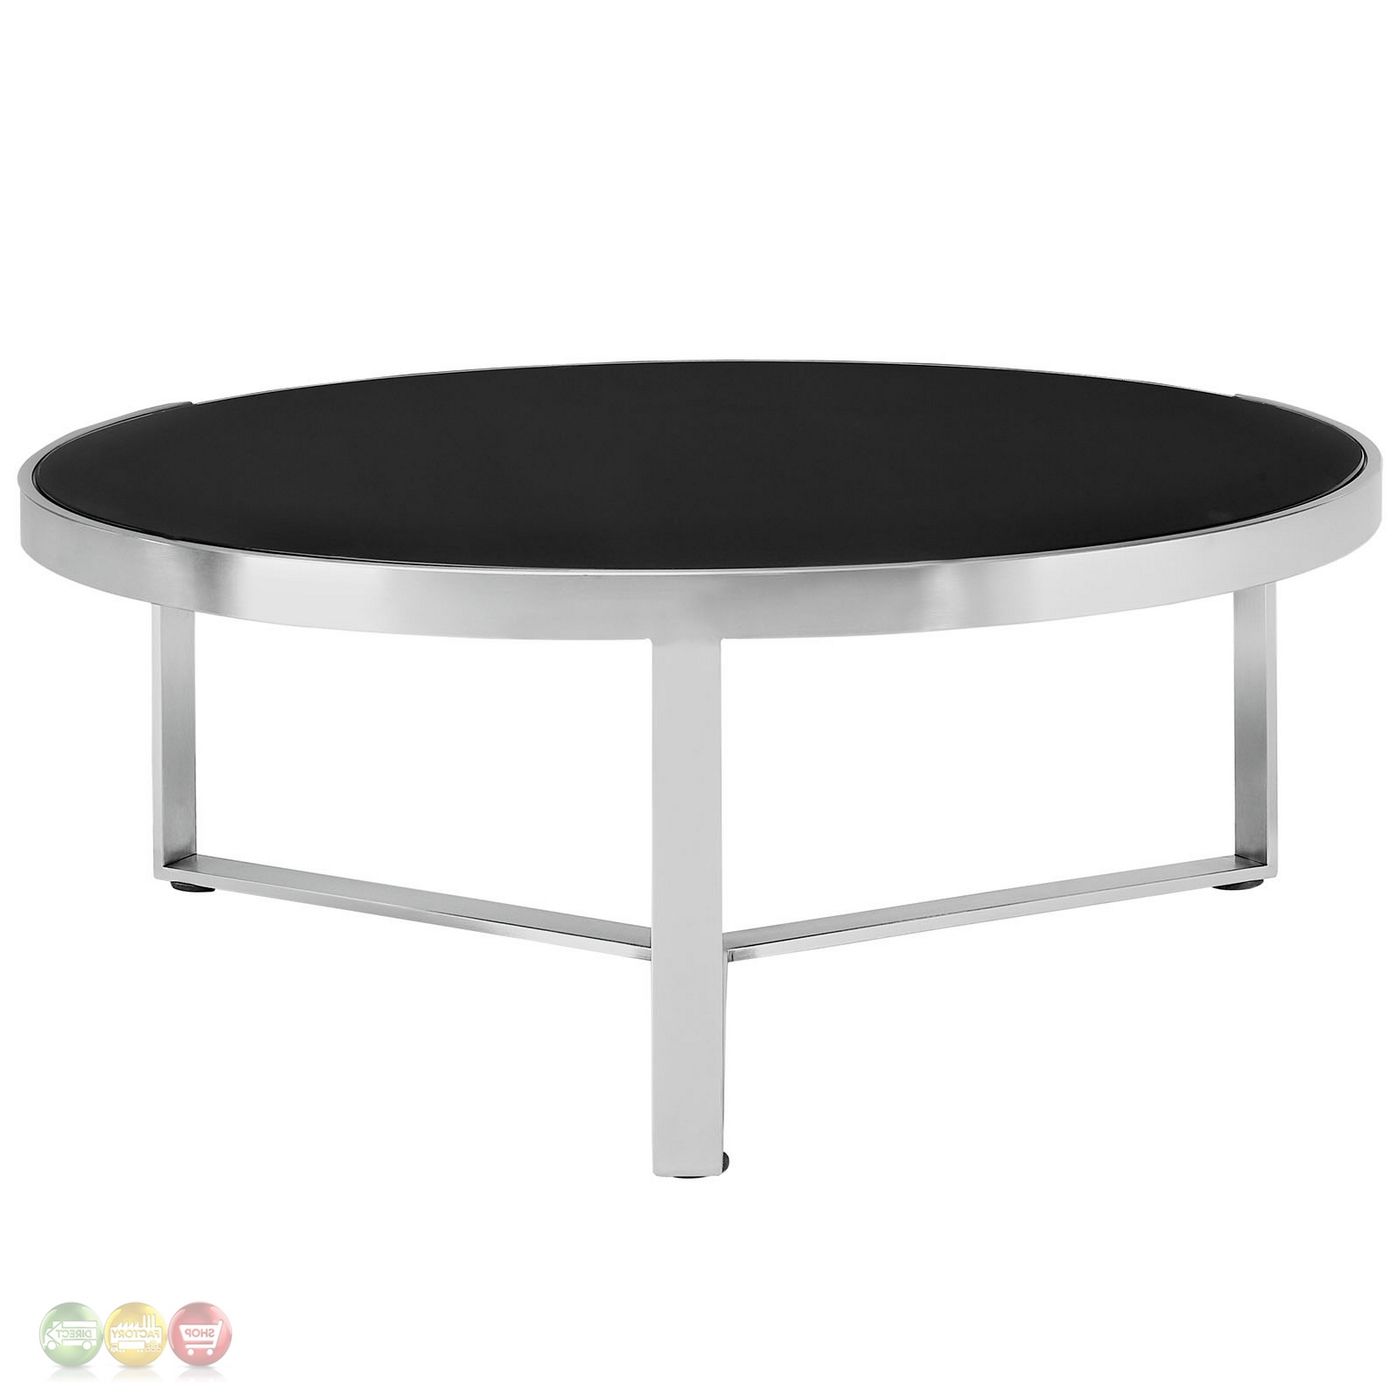 Disk Industrial Glass Top Round Coffee Table W/stainless Within Well Known Black Round Glass Top Cocktail Tables (View 12 of 20)